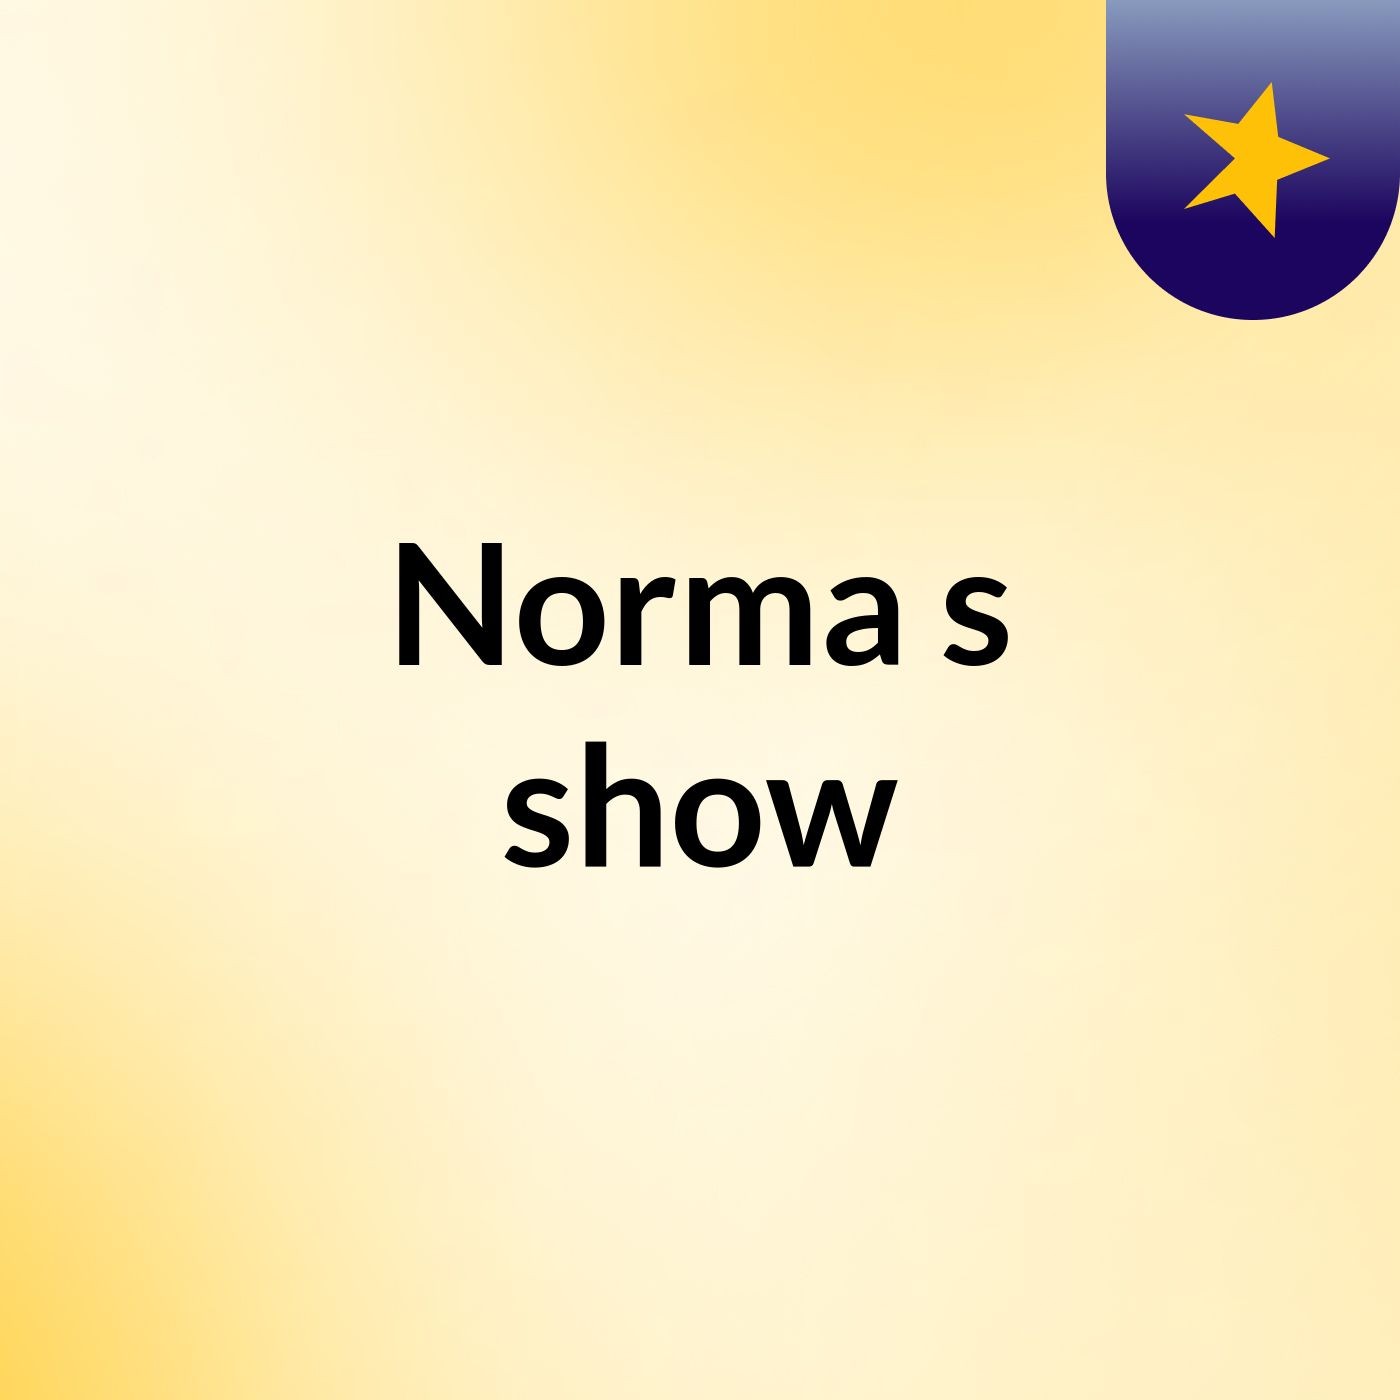 Norma's show